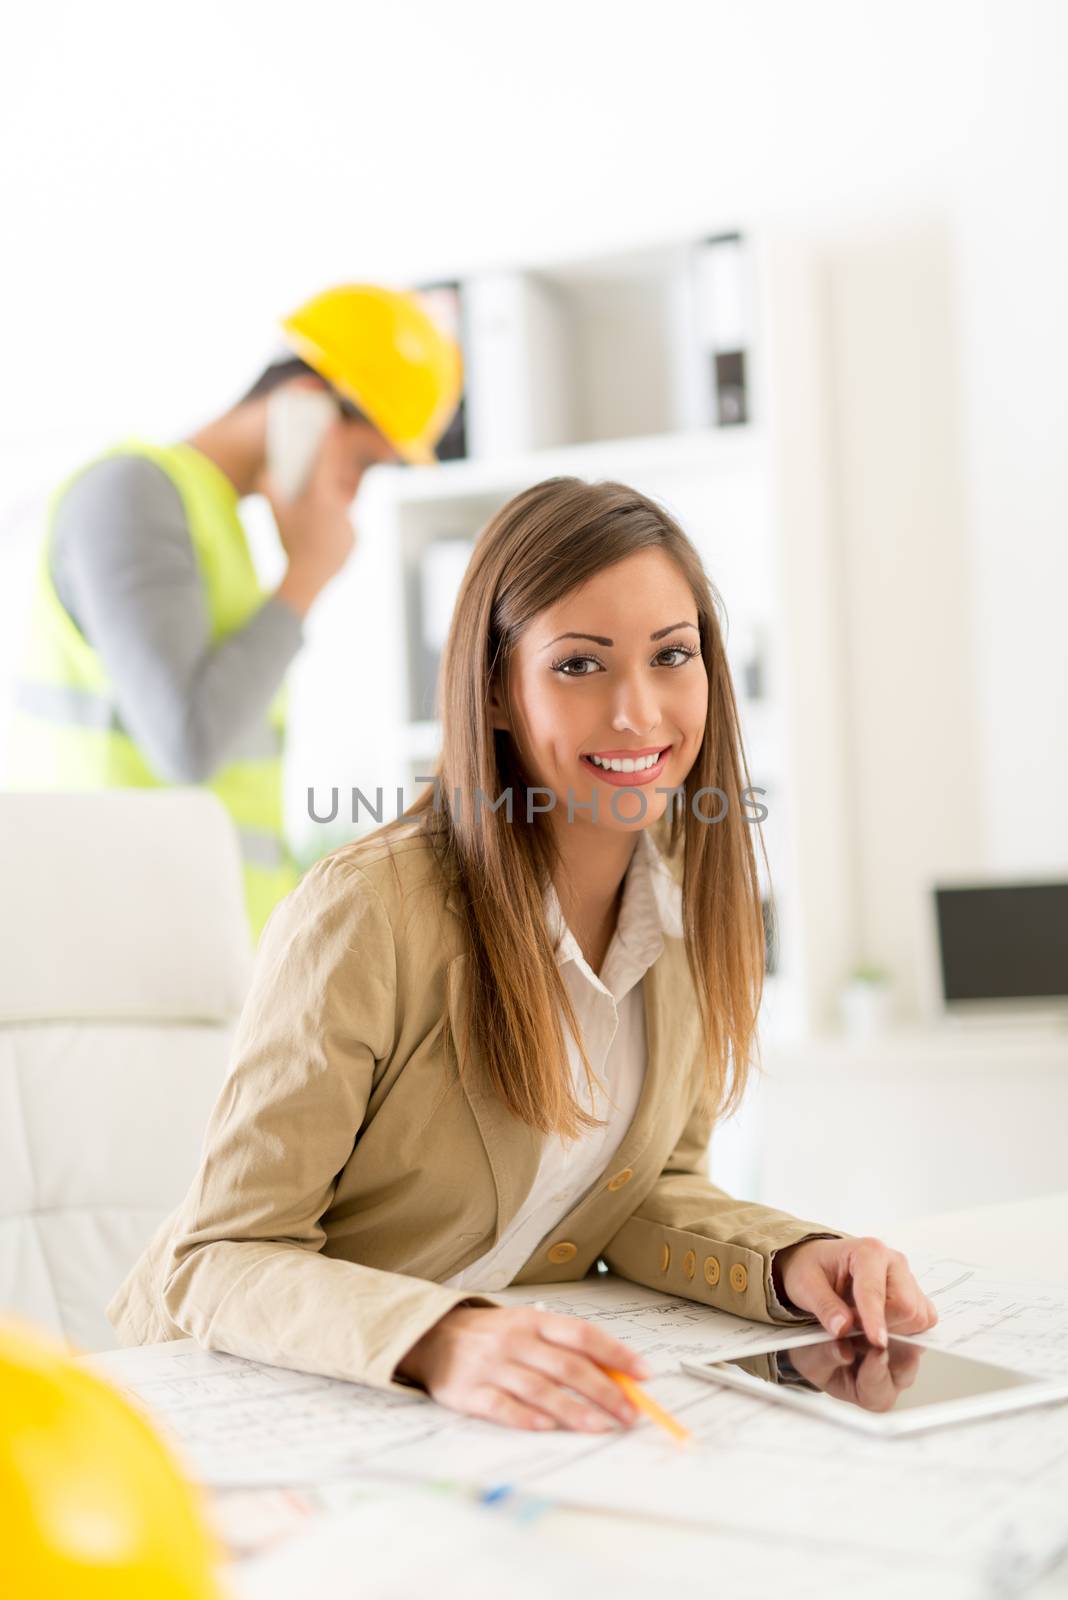 Smiling female architect with blueprint and tablet sitting at desk in office. Looking at camera.